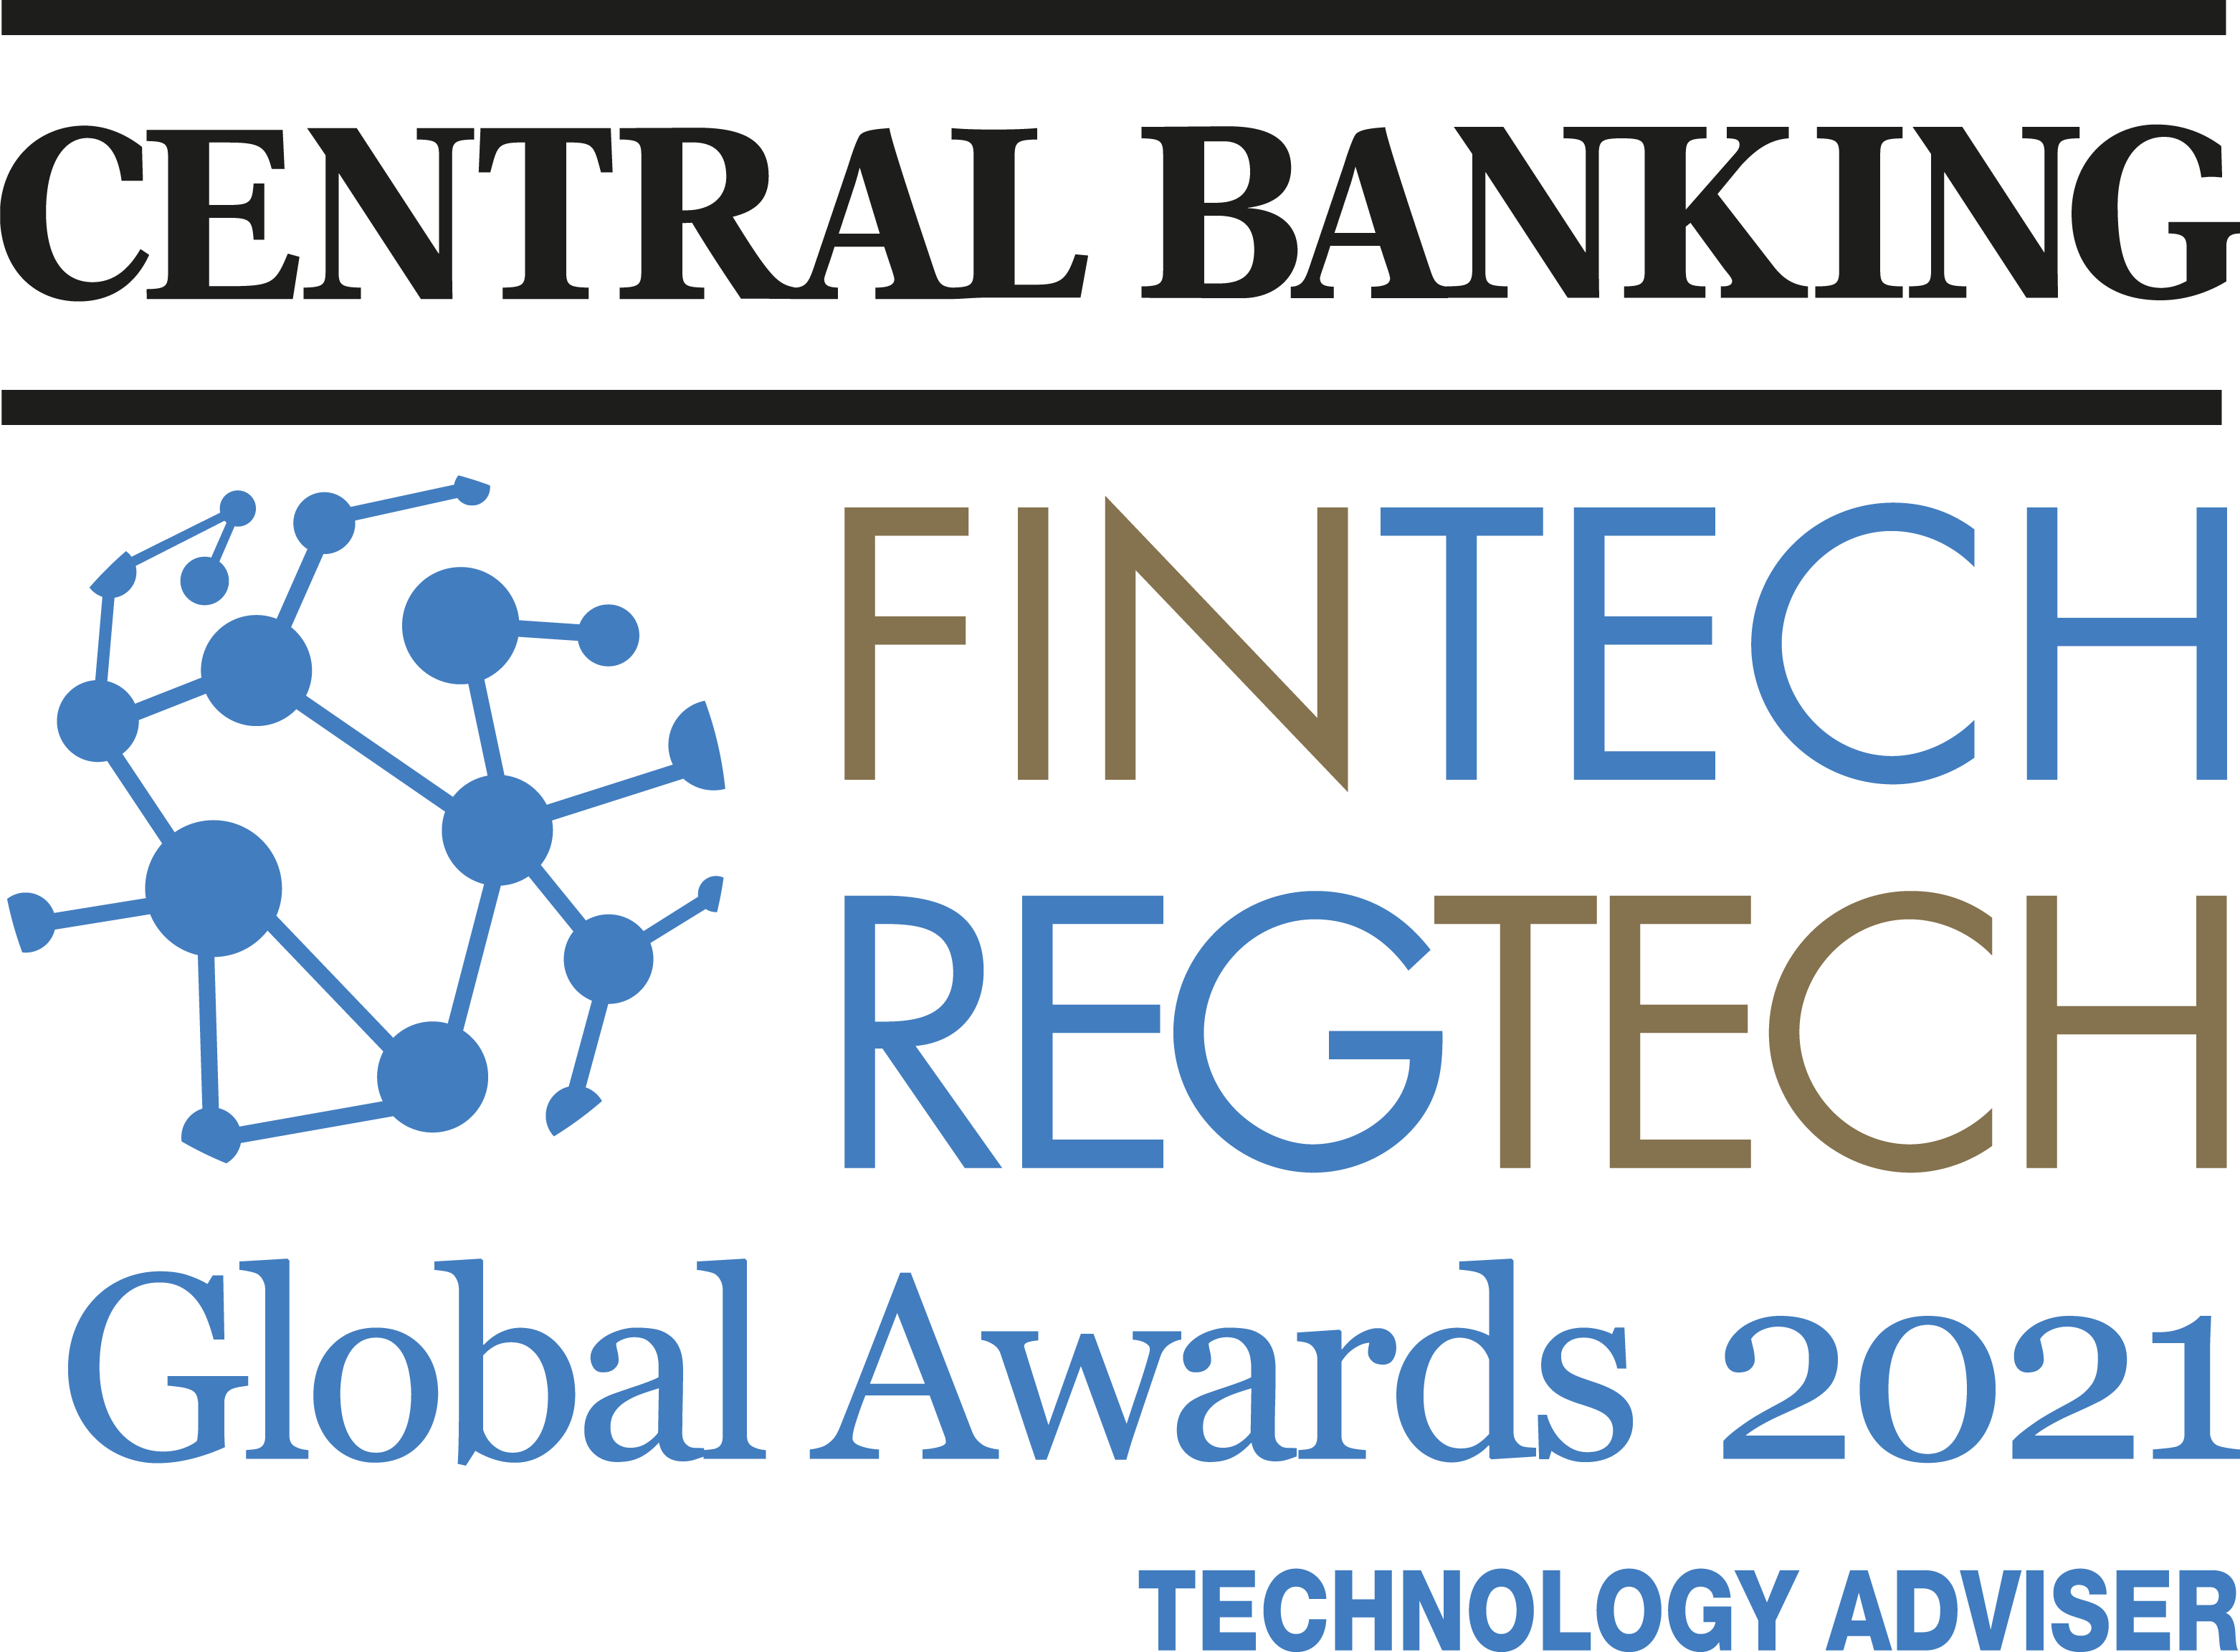 SkySparc Named Technology Advisor of the Year in Central Banking’s Fintech Awards 2021